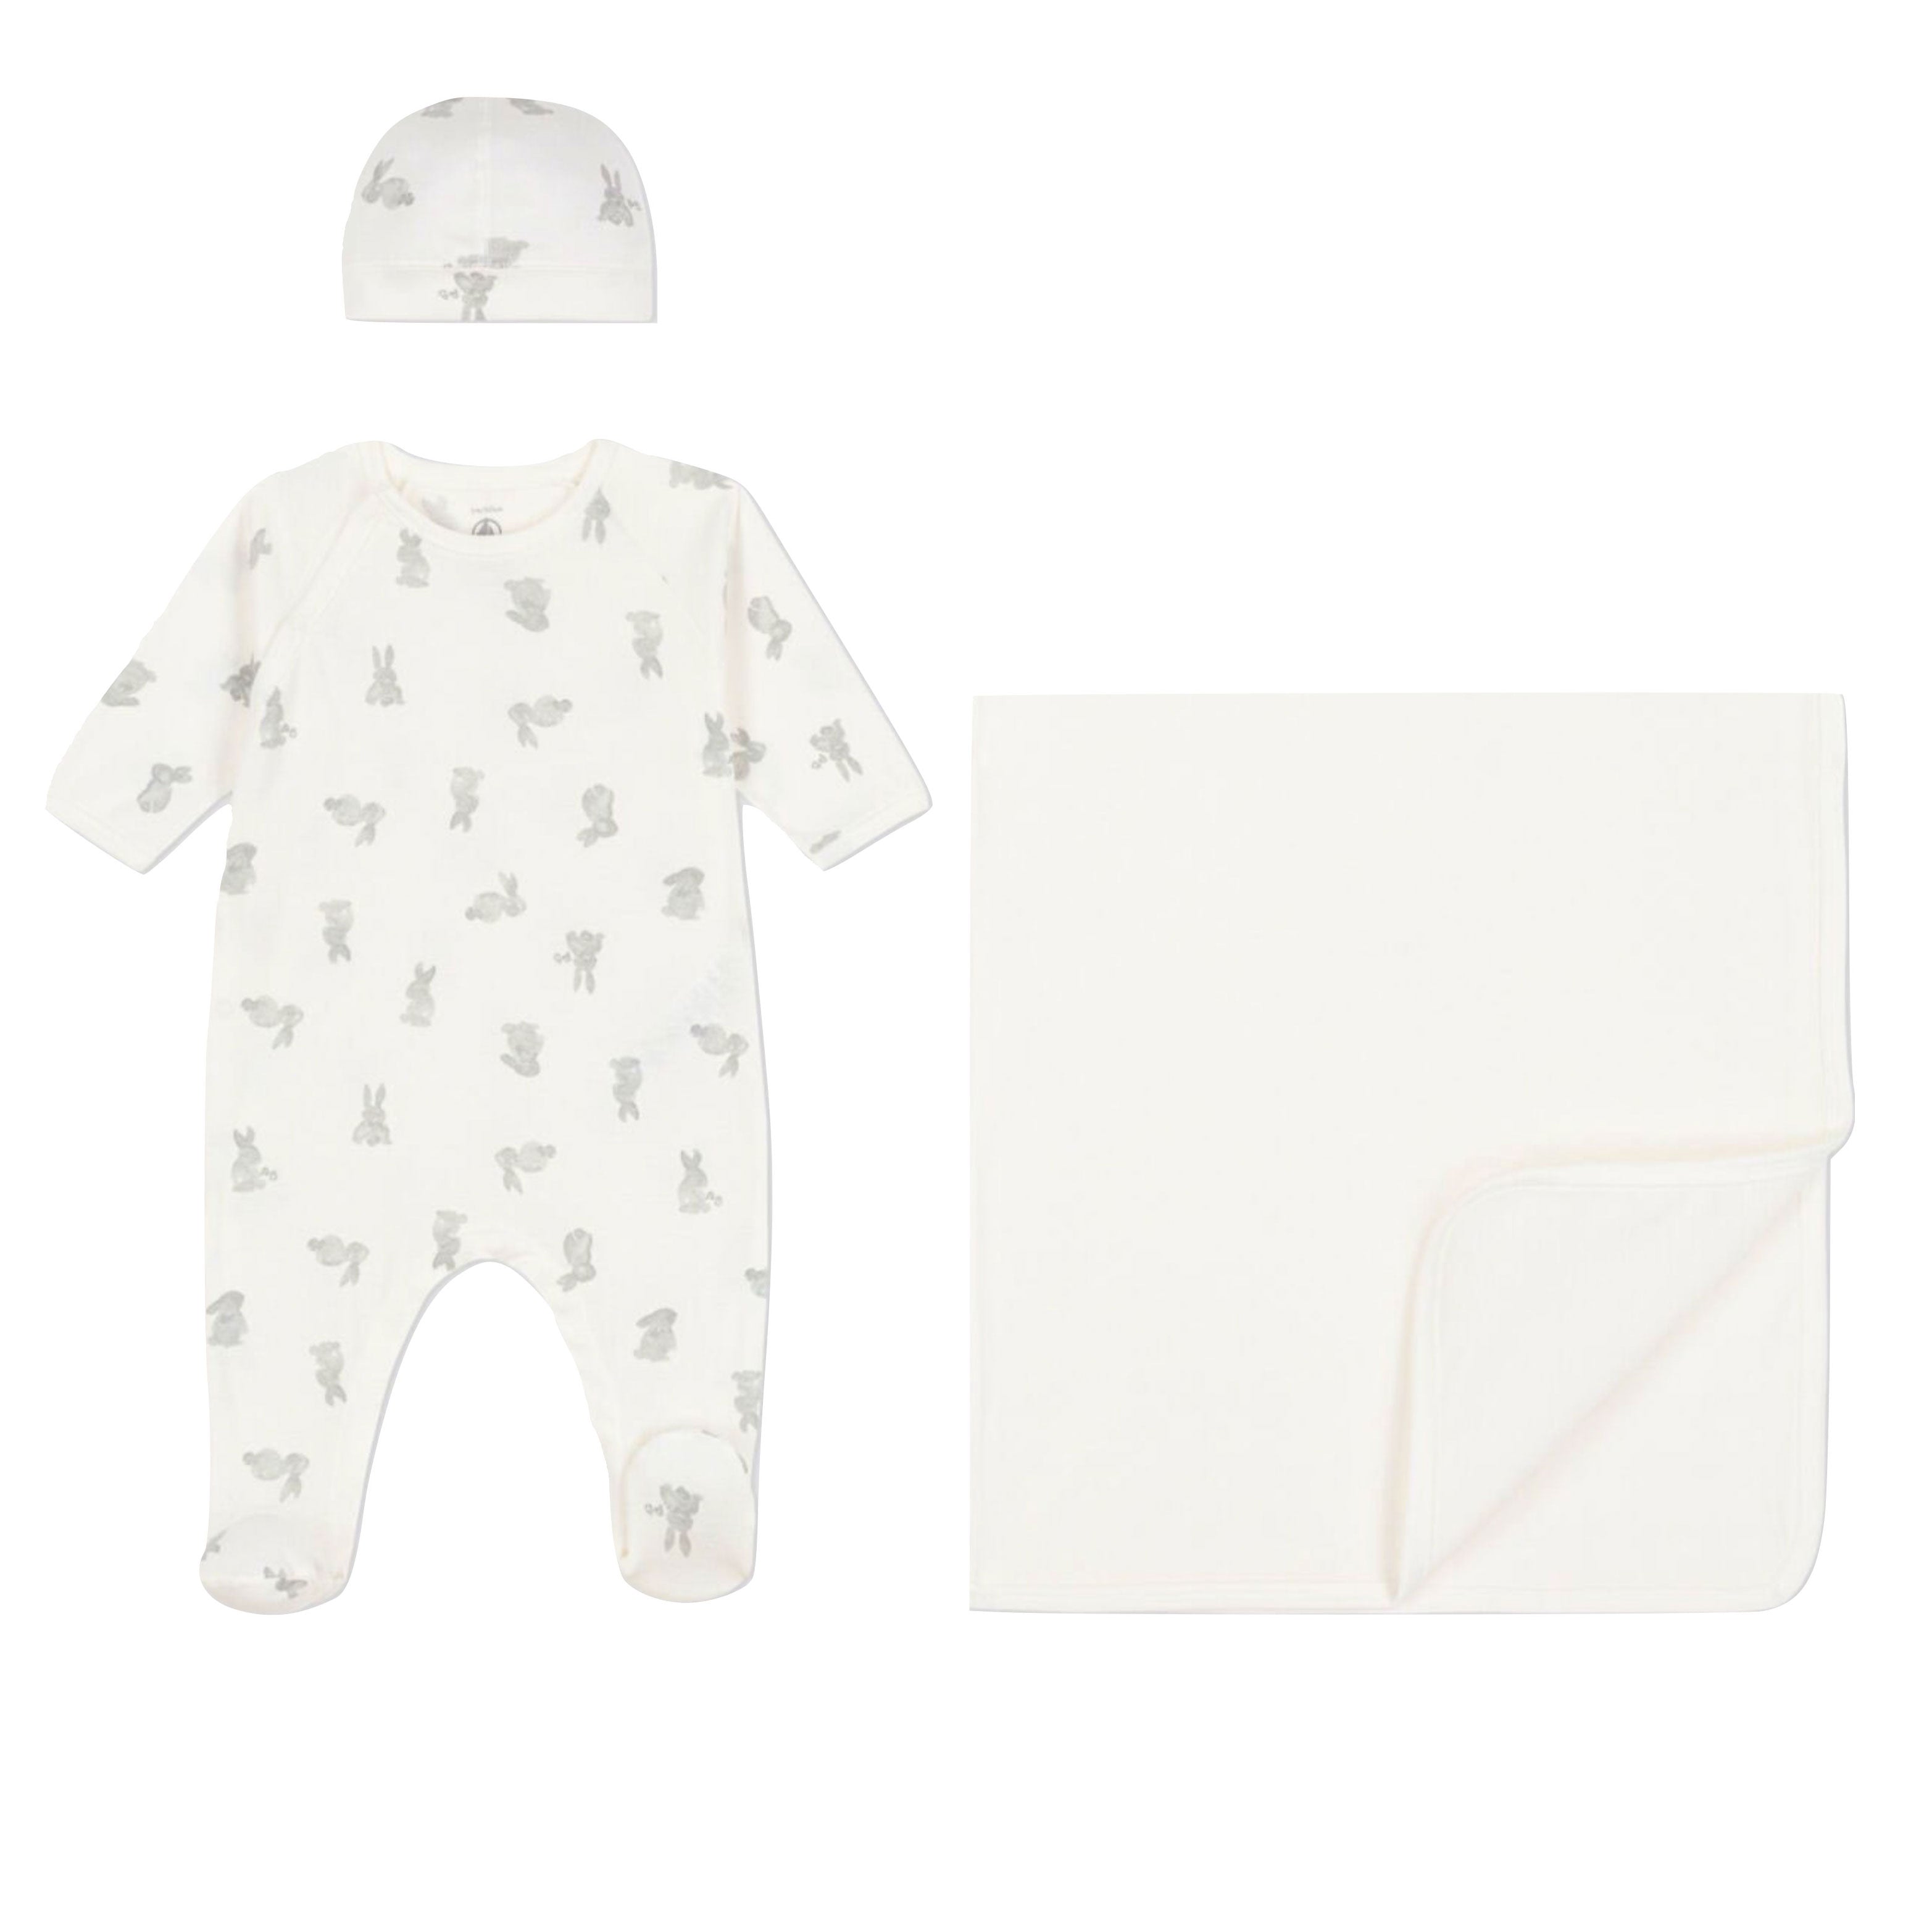 Luxury Baby Gift Set by Petit Bateau at Bonjour Baby Baskets